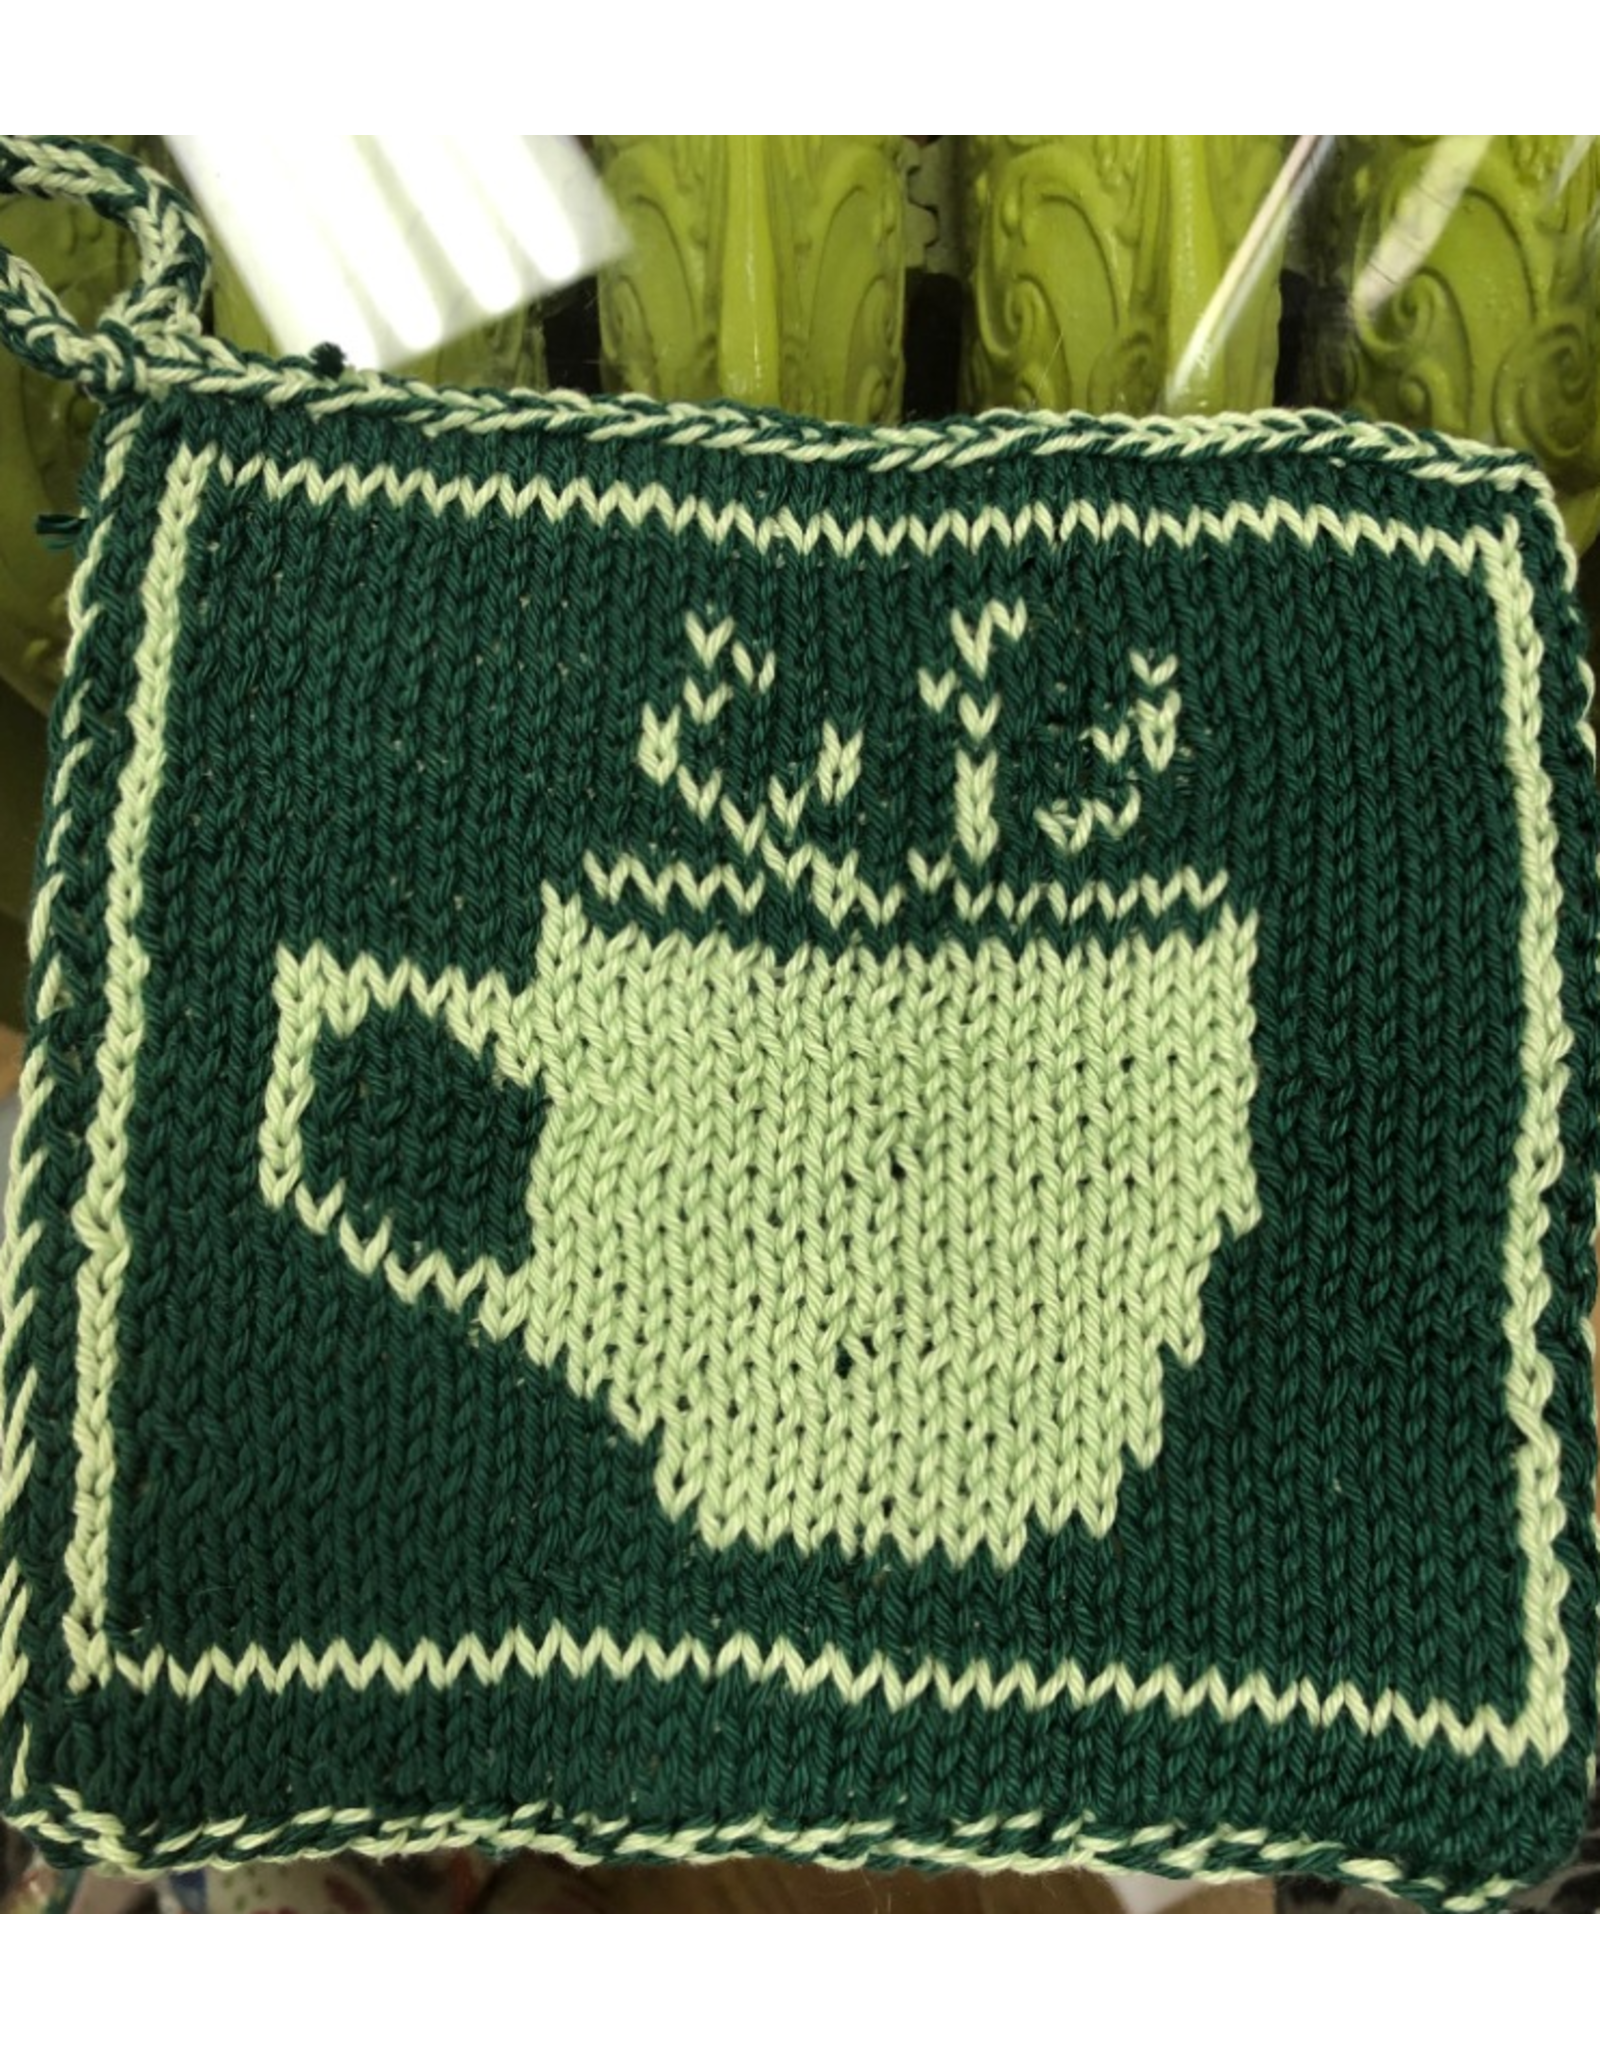 The New Knittery Beginning Double Knit Class Saturdays 3:30 pm to 5:30 pm